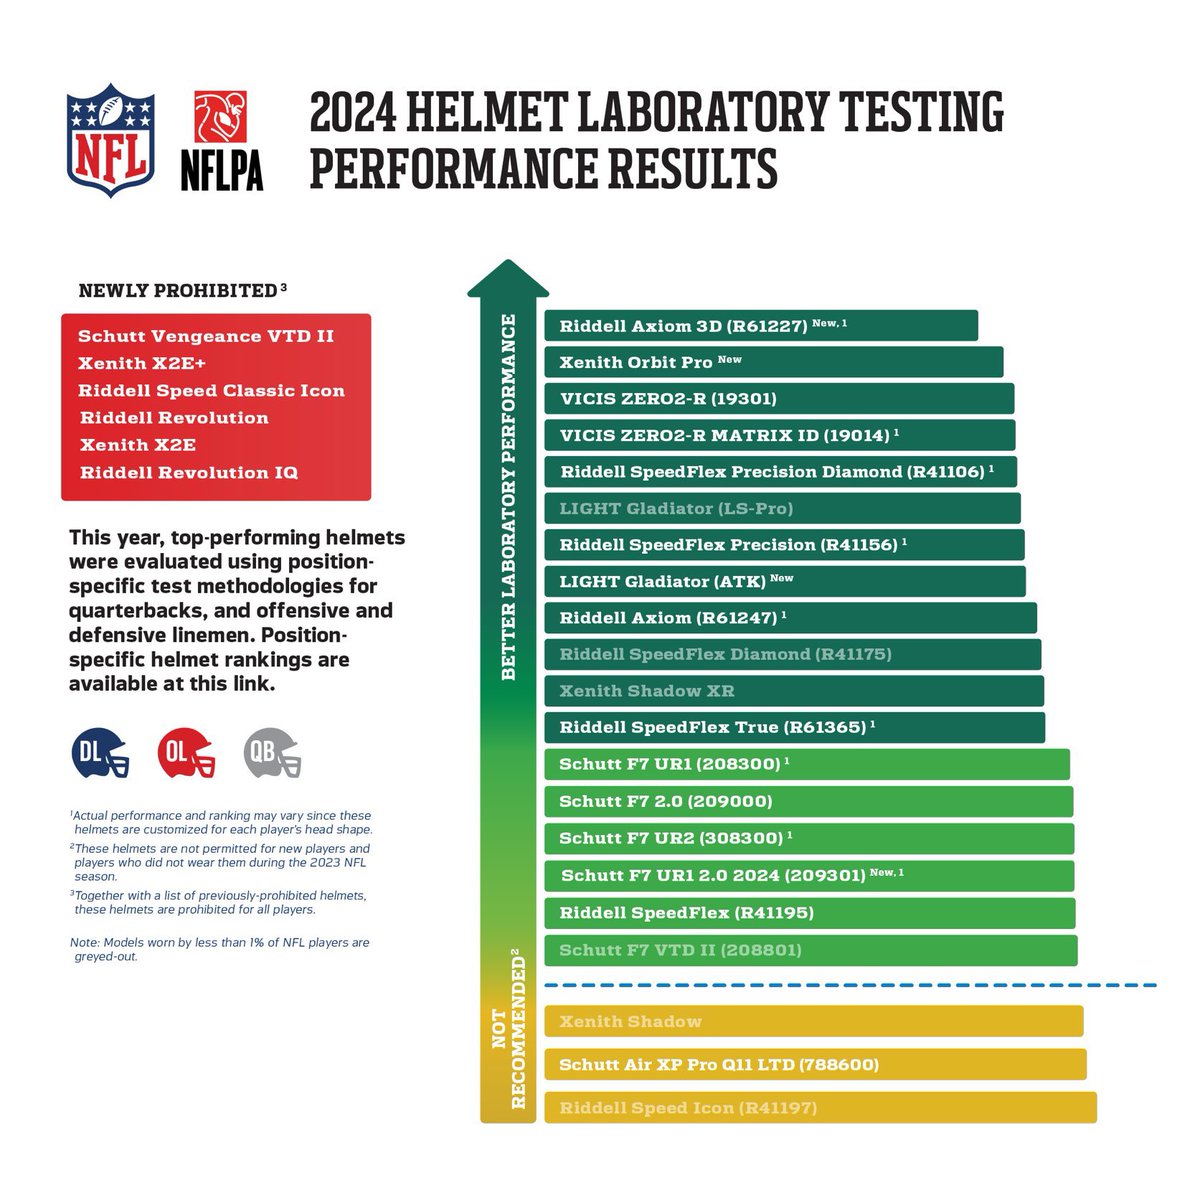 The annual helmet testing by the NFL and NFLPA is complete. 12 new helmets to choose from including 8 position specific ones for QB, OL and DL. And six performed so well players wearing them will be exempt from wearing Guardian Caps in practice.